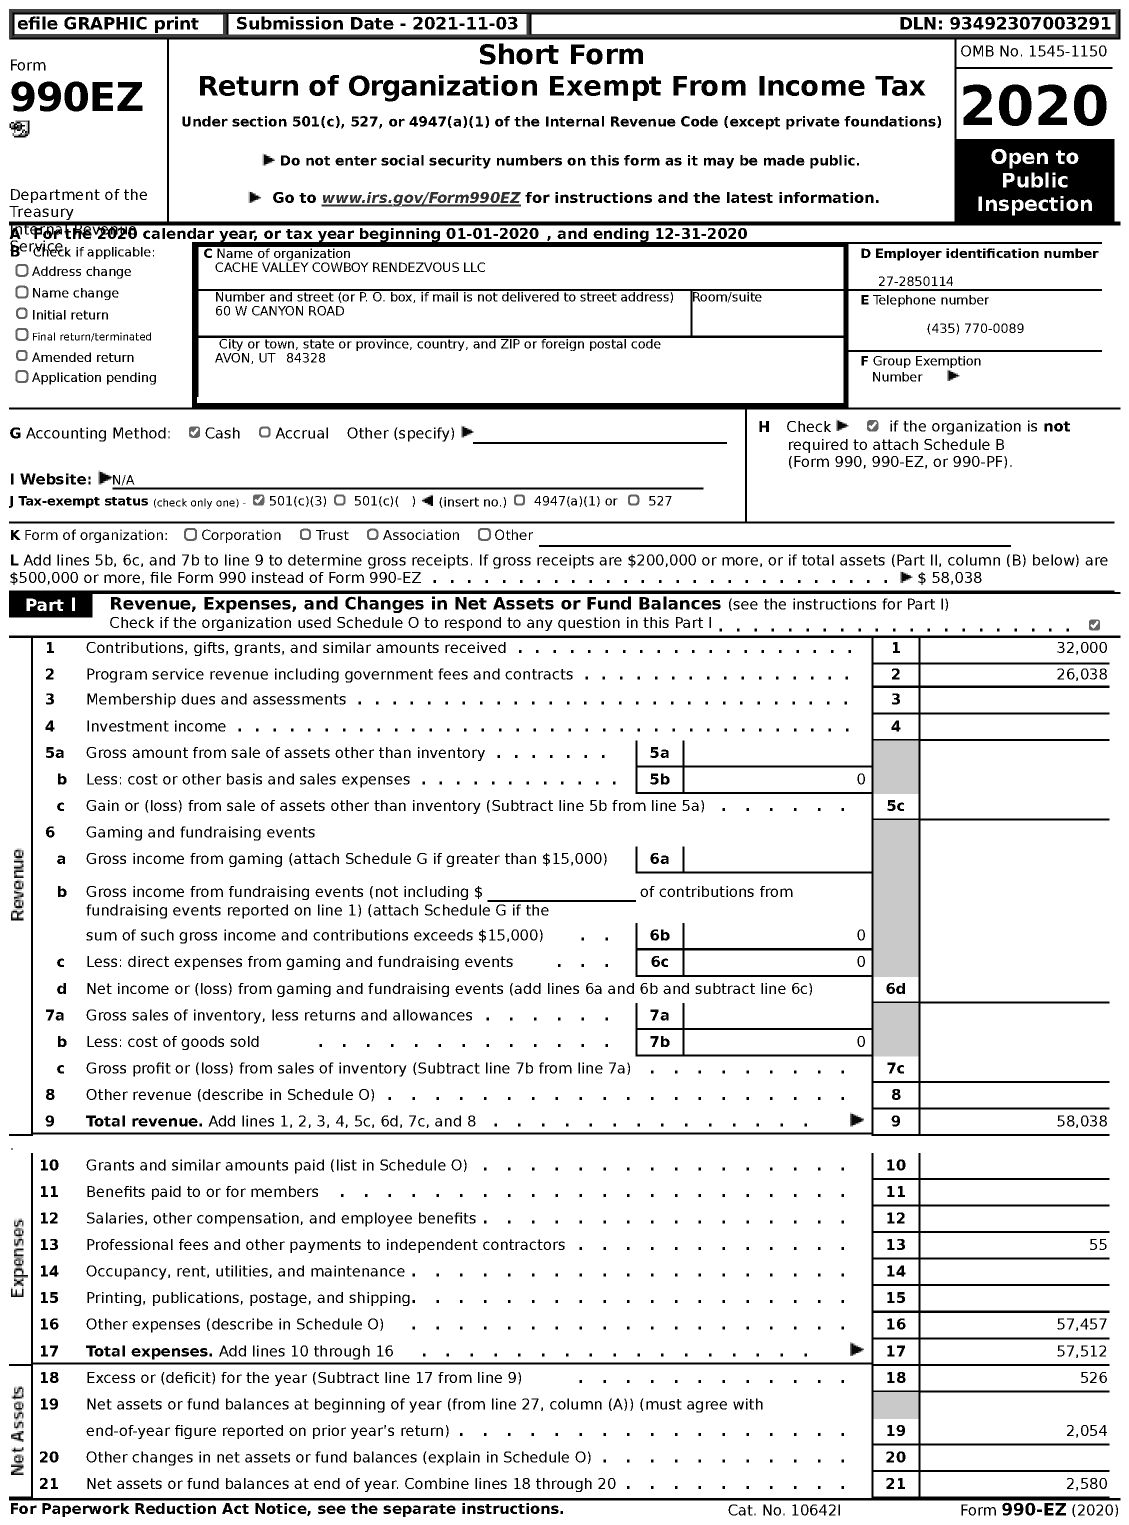 Image of first page of 2020 Form 990EZ for Cache Valley Cowboy Rendezvous LLC